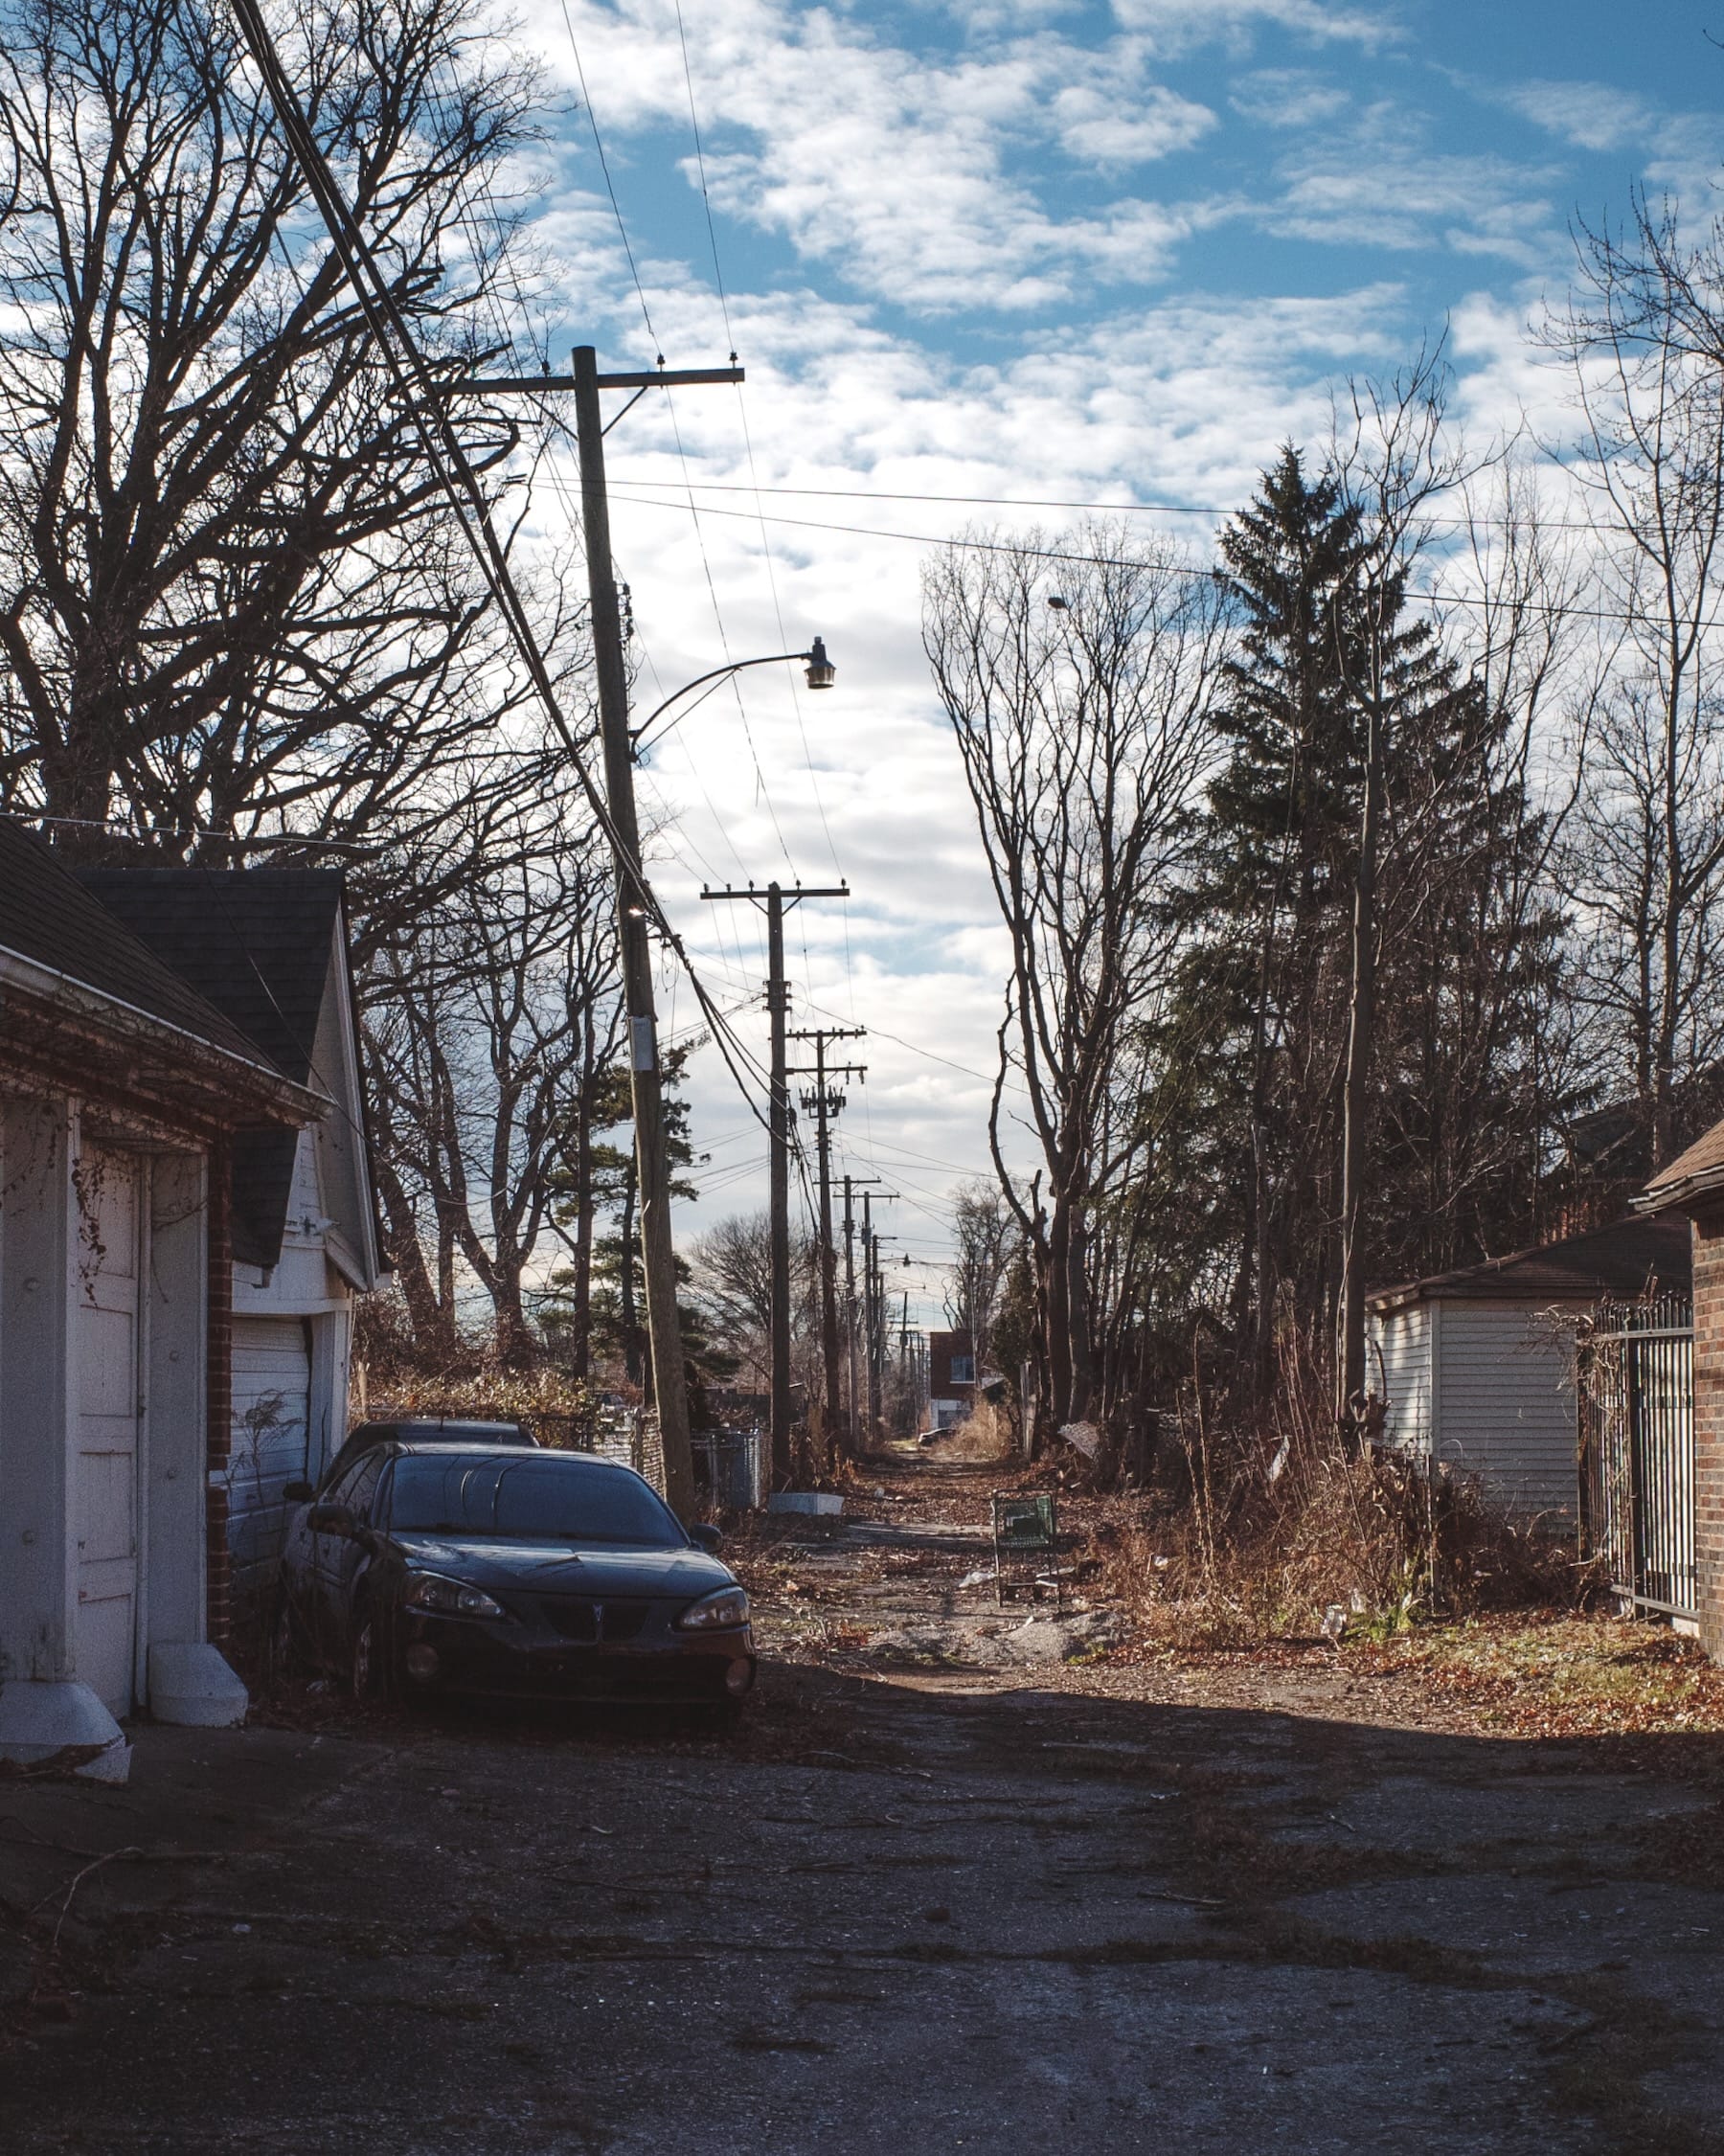 Dry winter alley with cracked pavement, power lines, old car and empty shopping cart.